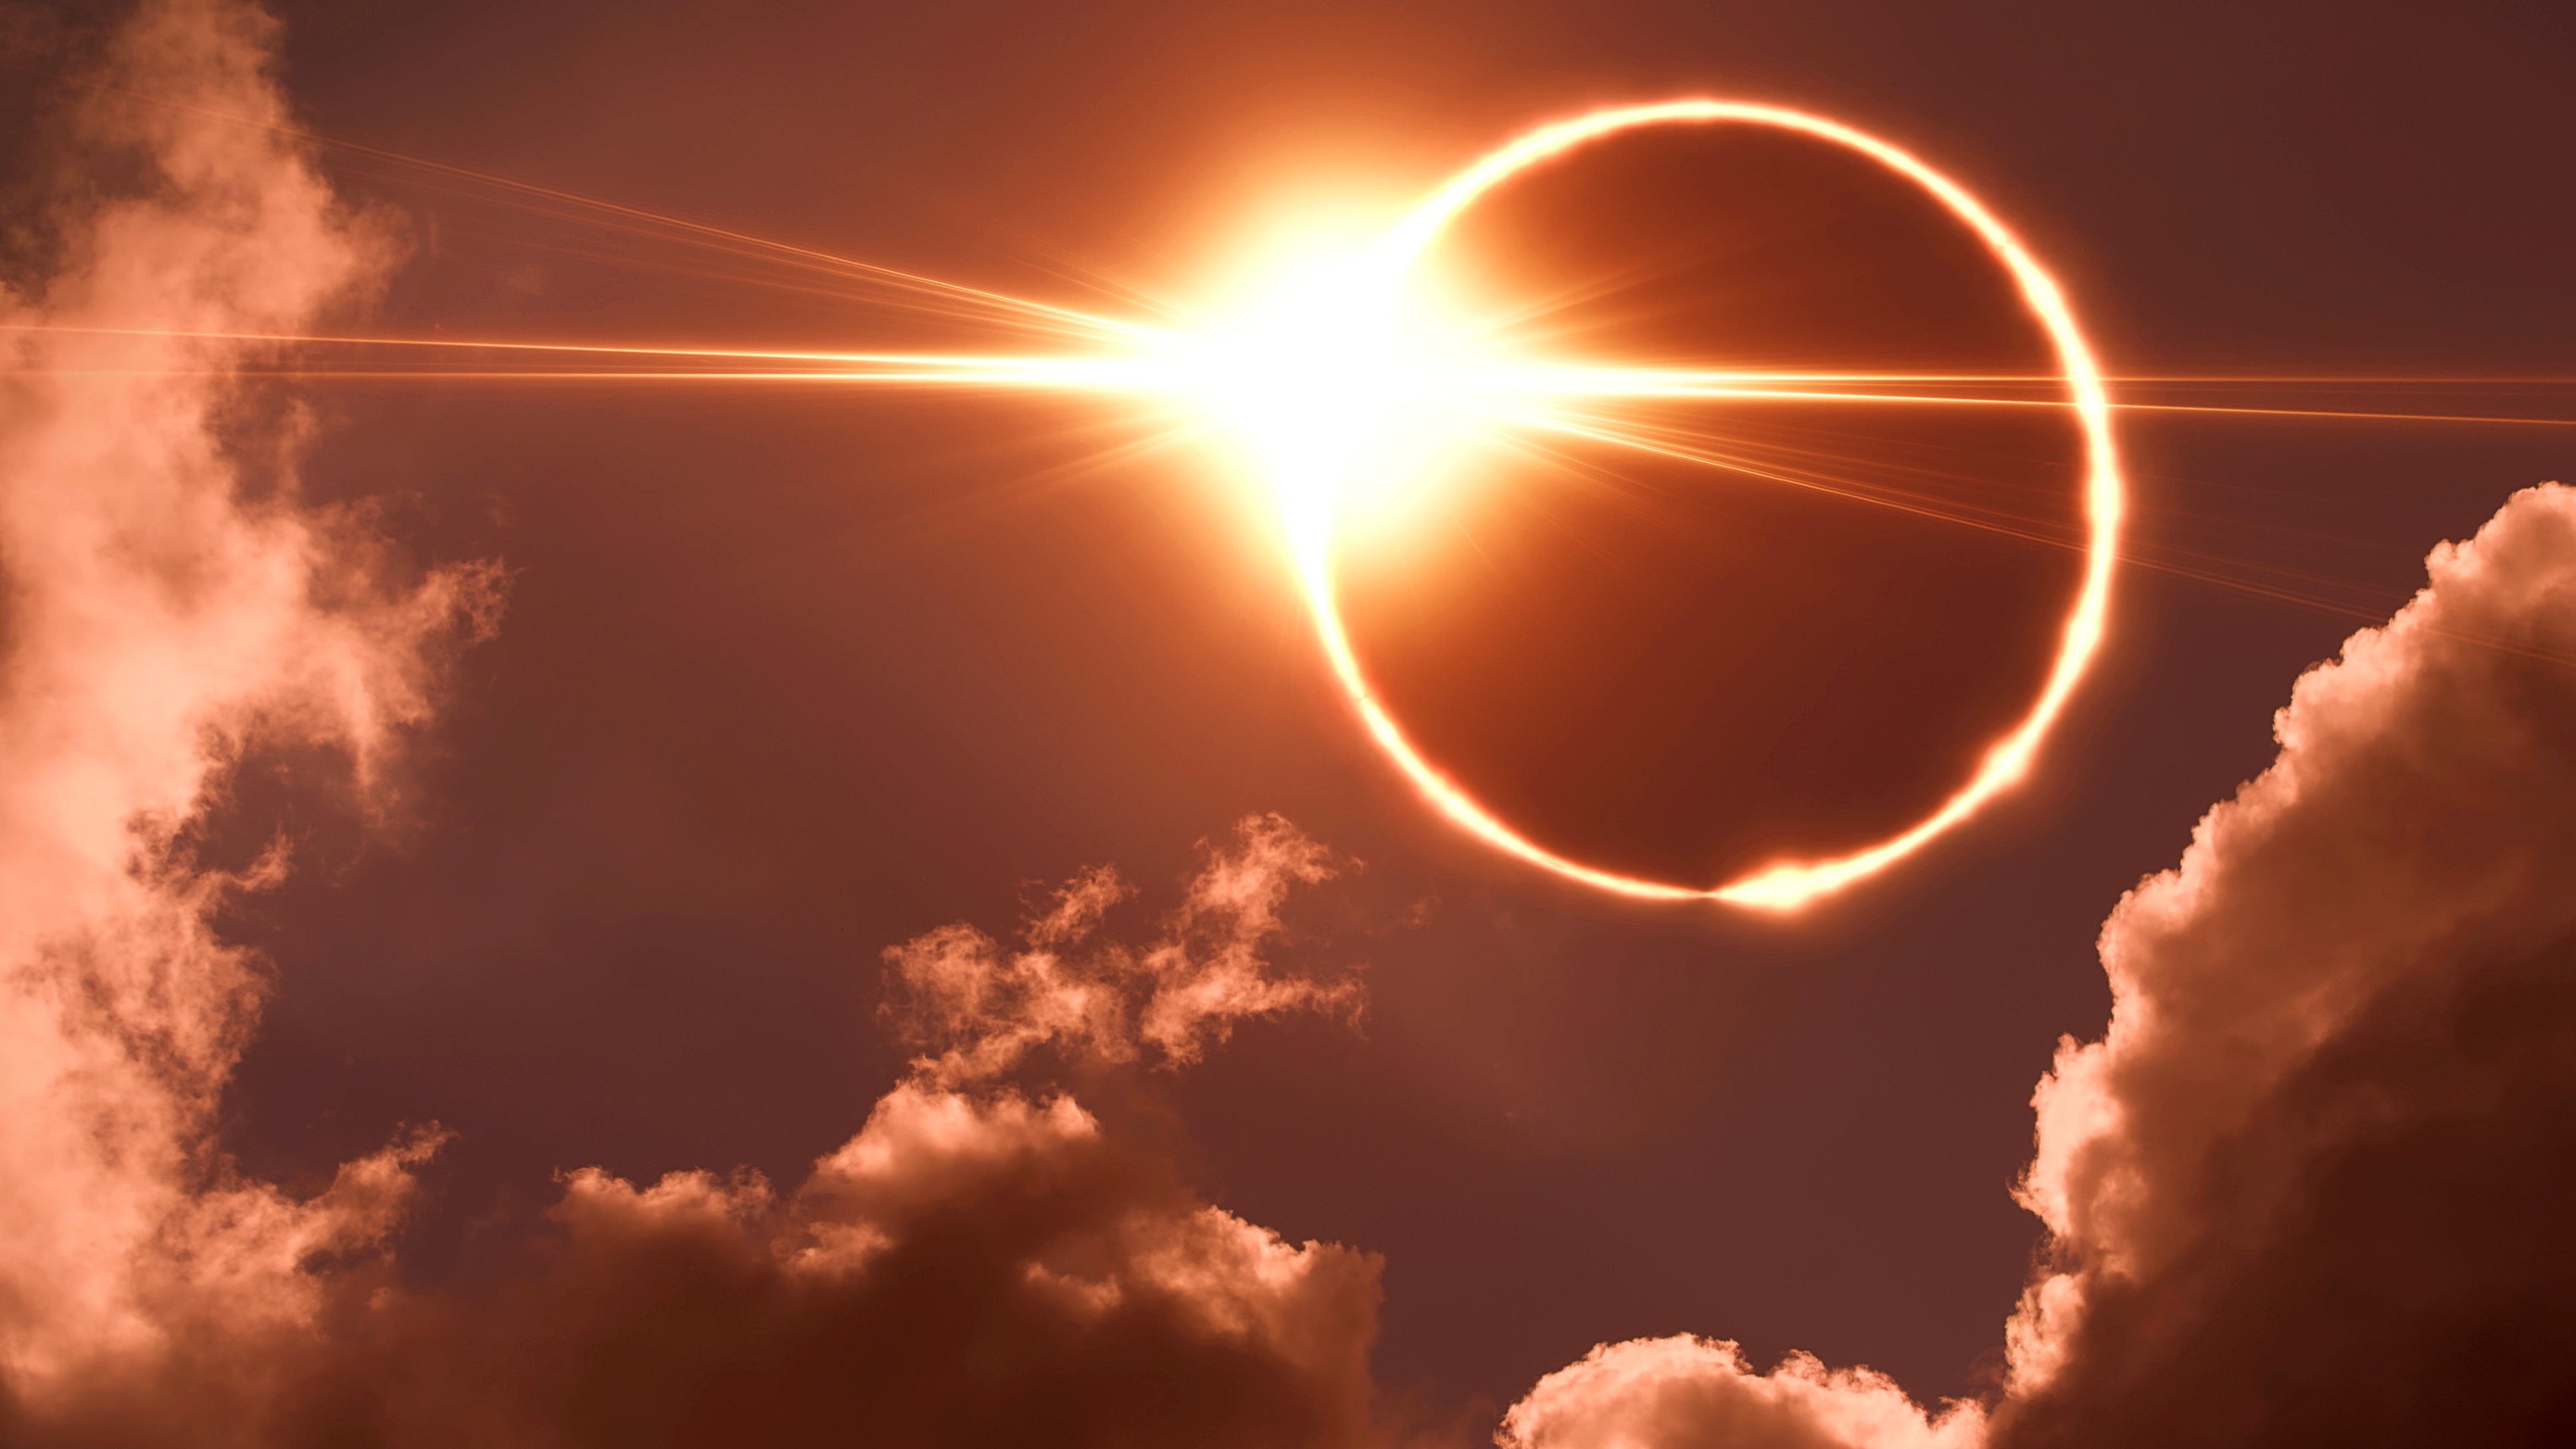 A dramatic solar eclipse with a radiant ring of fire visible around the moon, set against a backdrop of clouds and a sunburst.